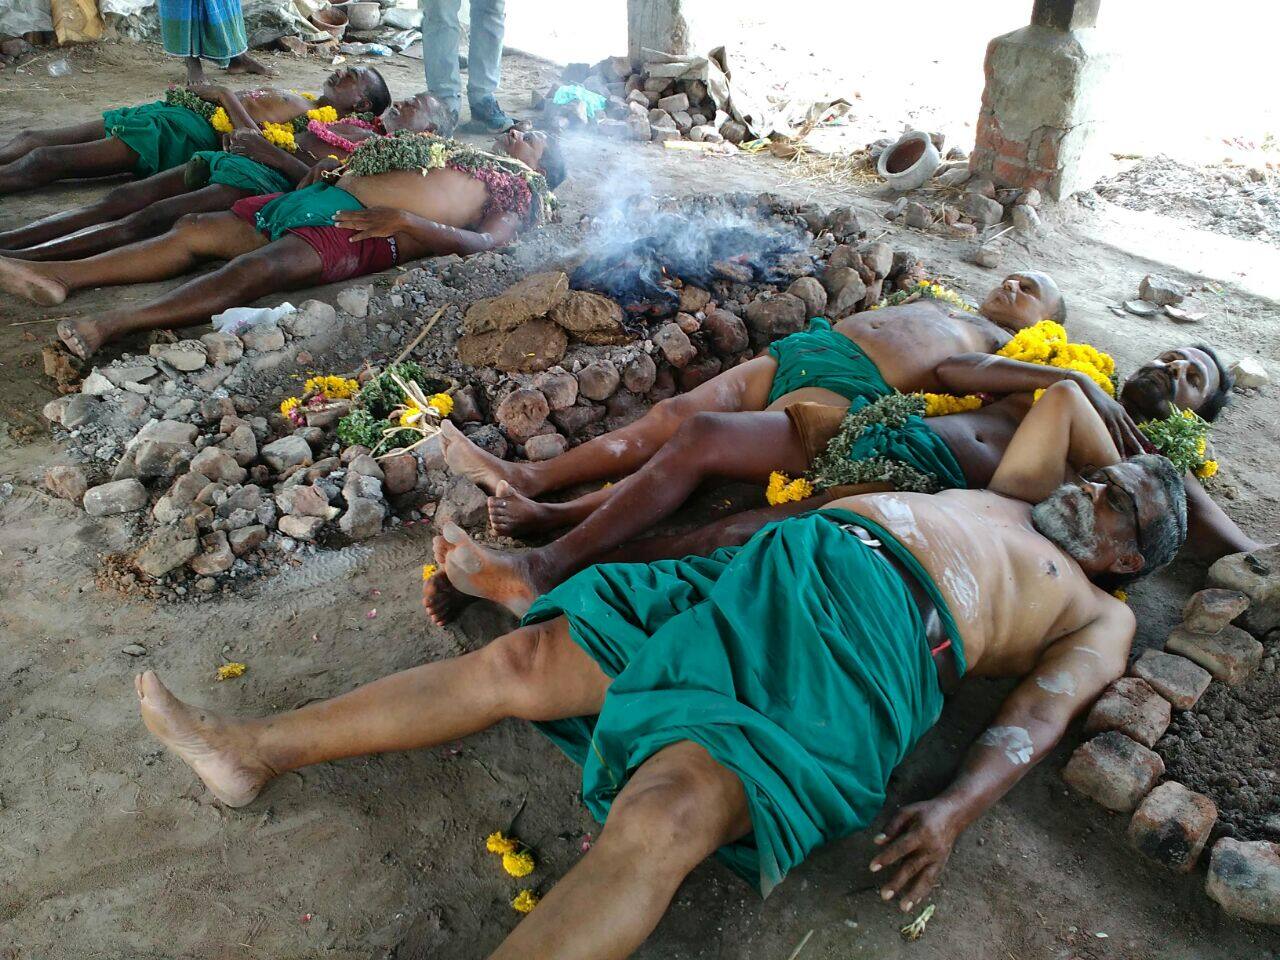 Ayyakannu sleeps next to the dead bodies for Cauvery water, will his pleas be heard?